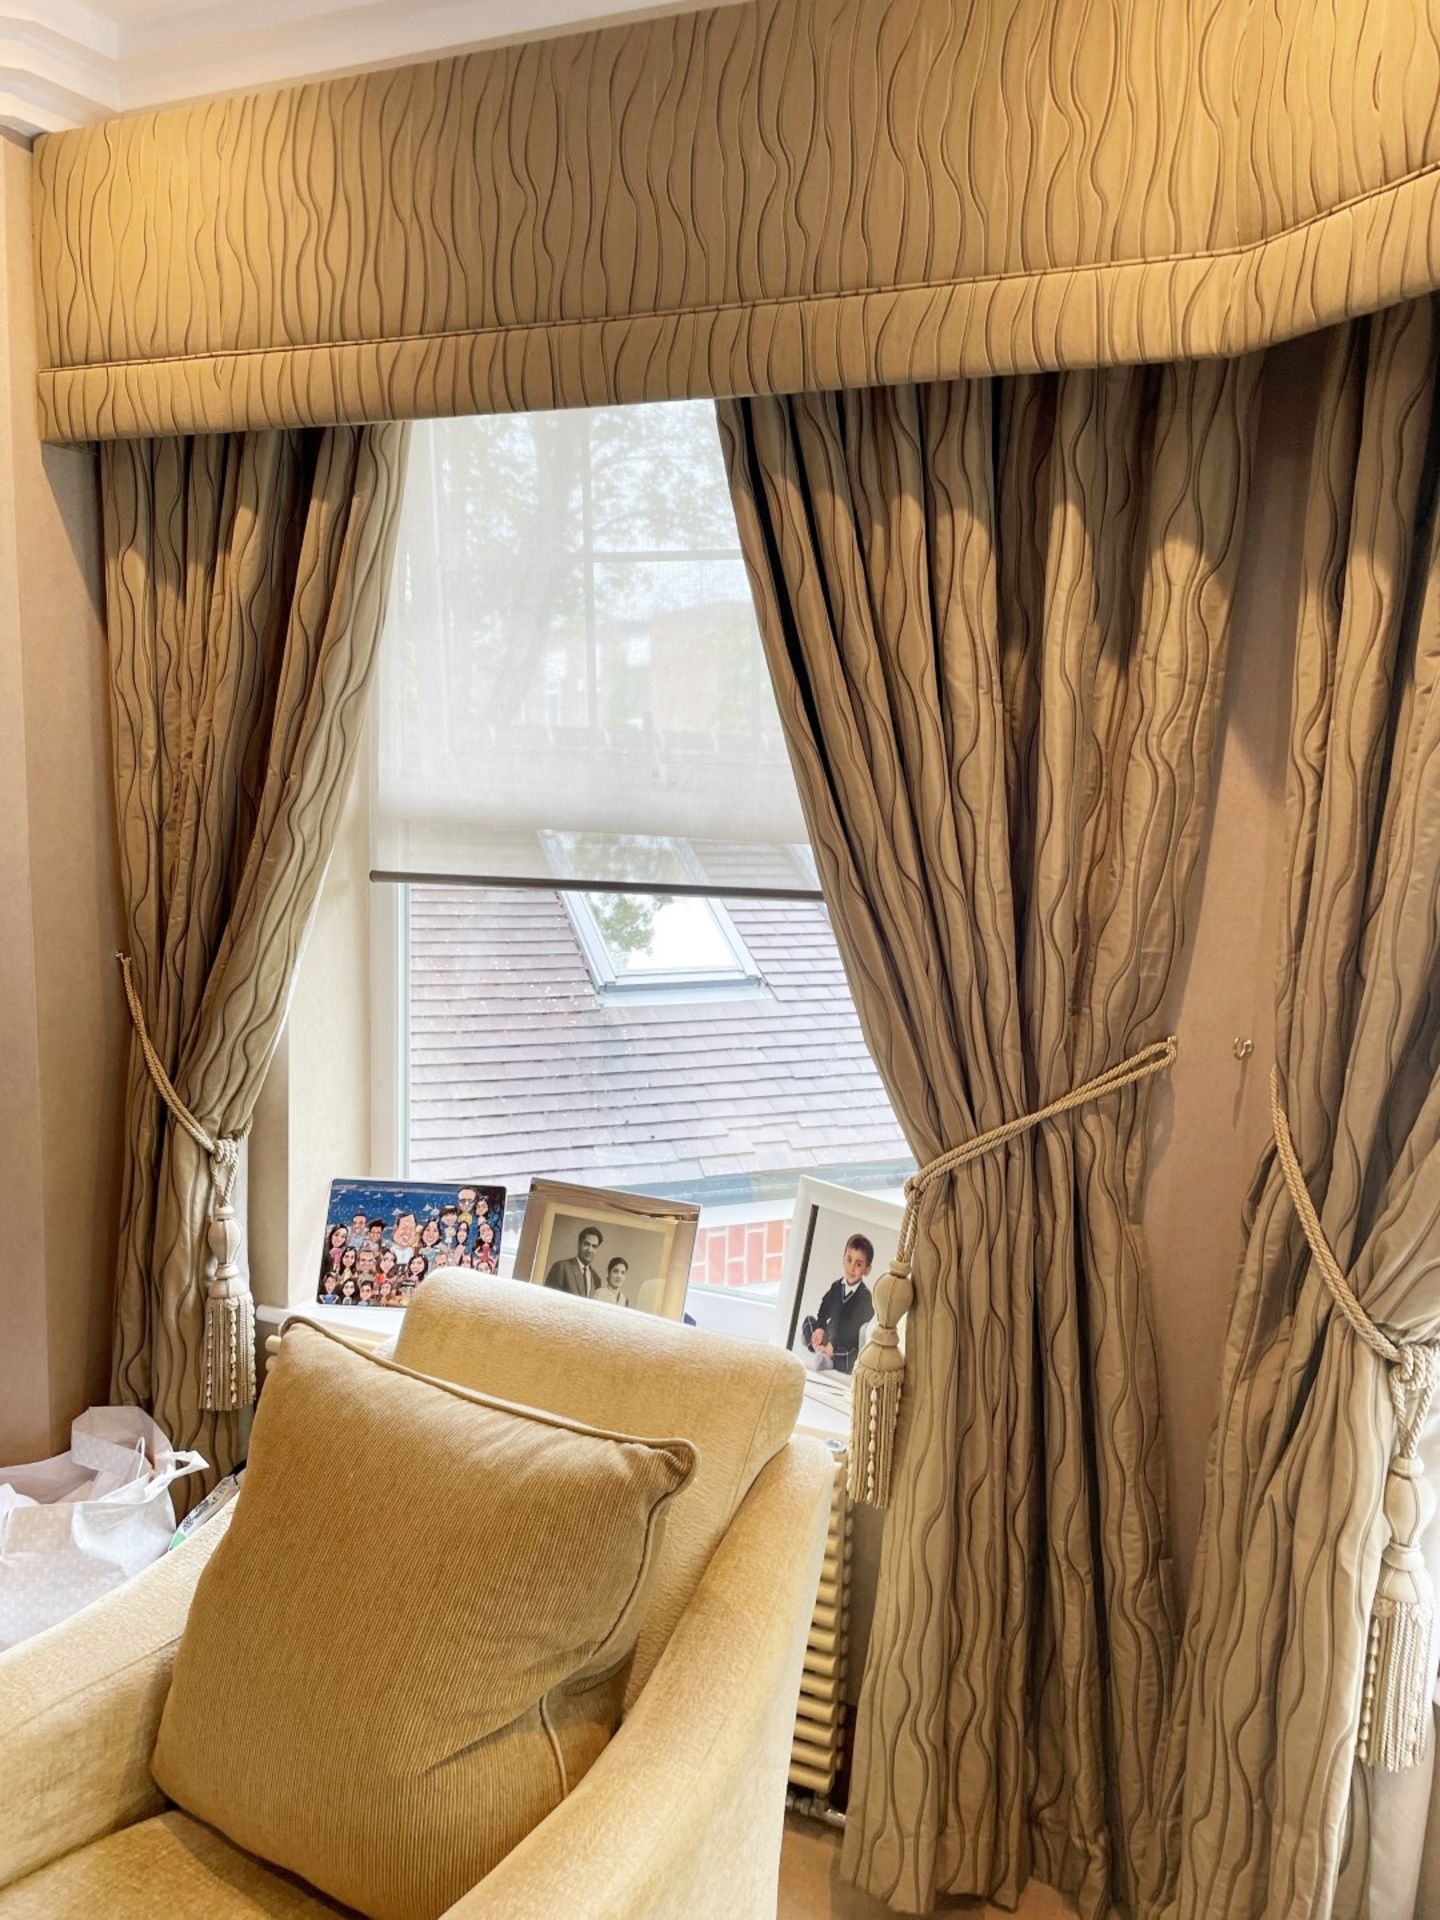 3 x Pairs of Premium Quality Curtains - Each Includes Pelmets, Ties & Blinds - NO VAT - Image 5 of 14